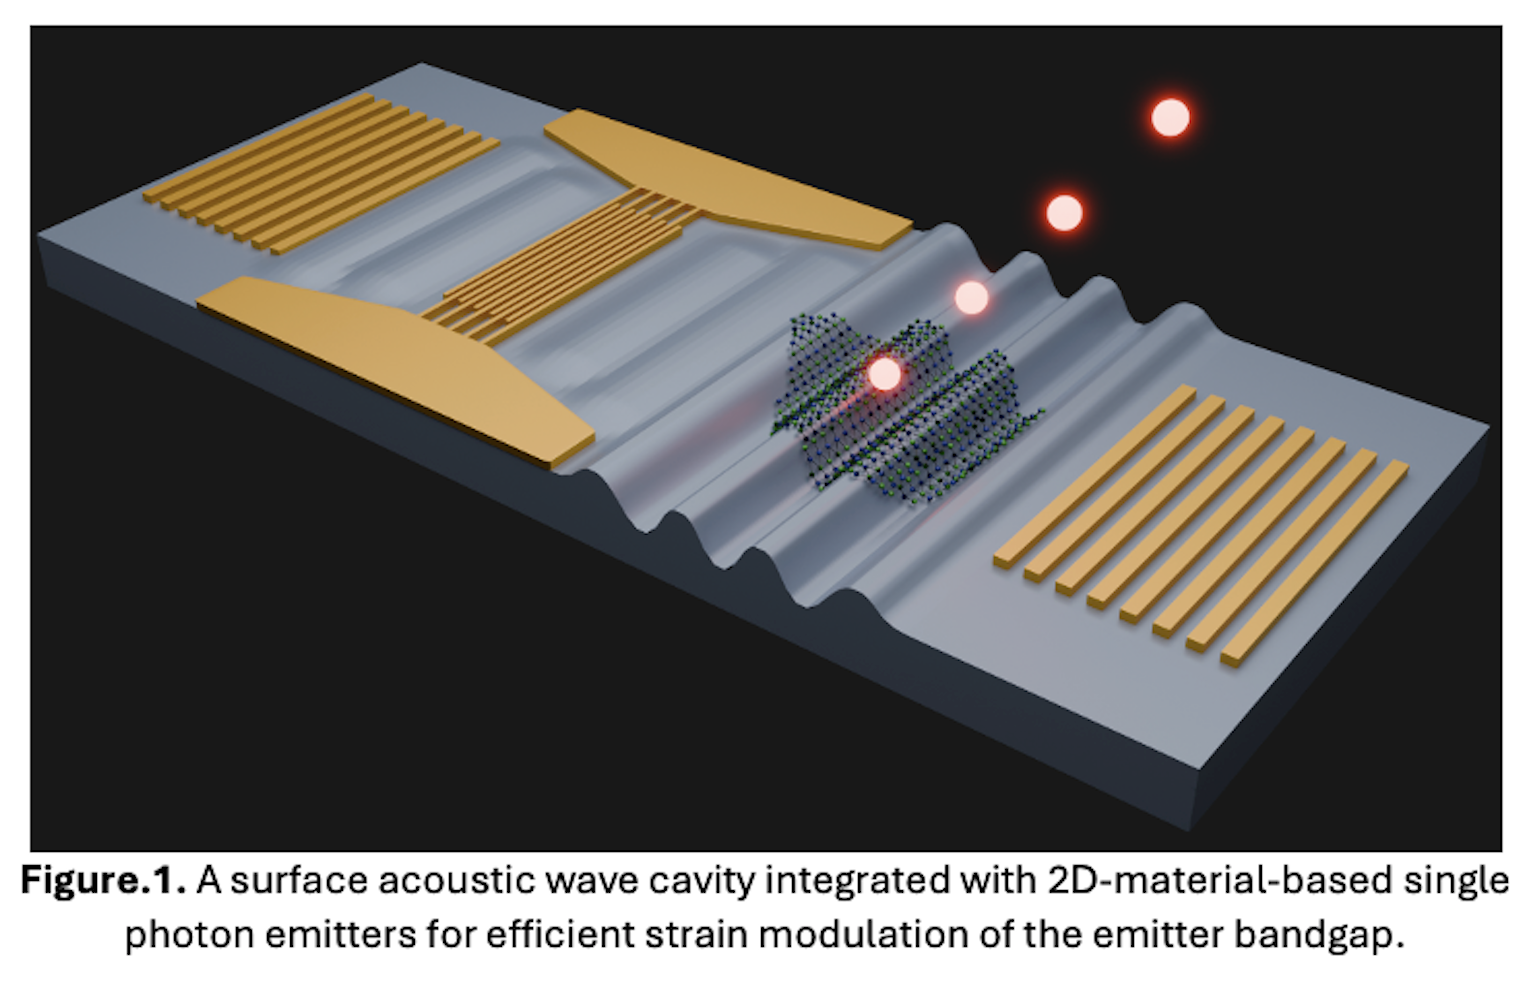 A Surface Acoustic Wave Capacity Integrated with 2D Material Based Single Photon Emitters